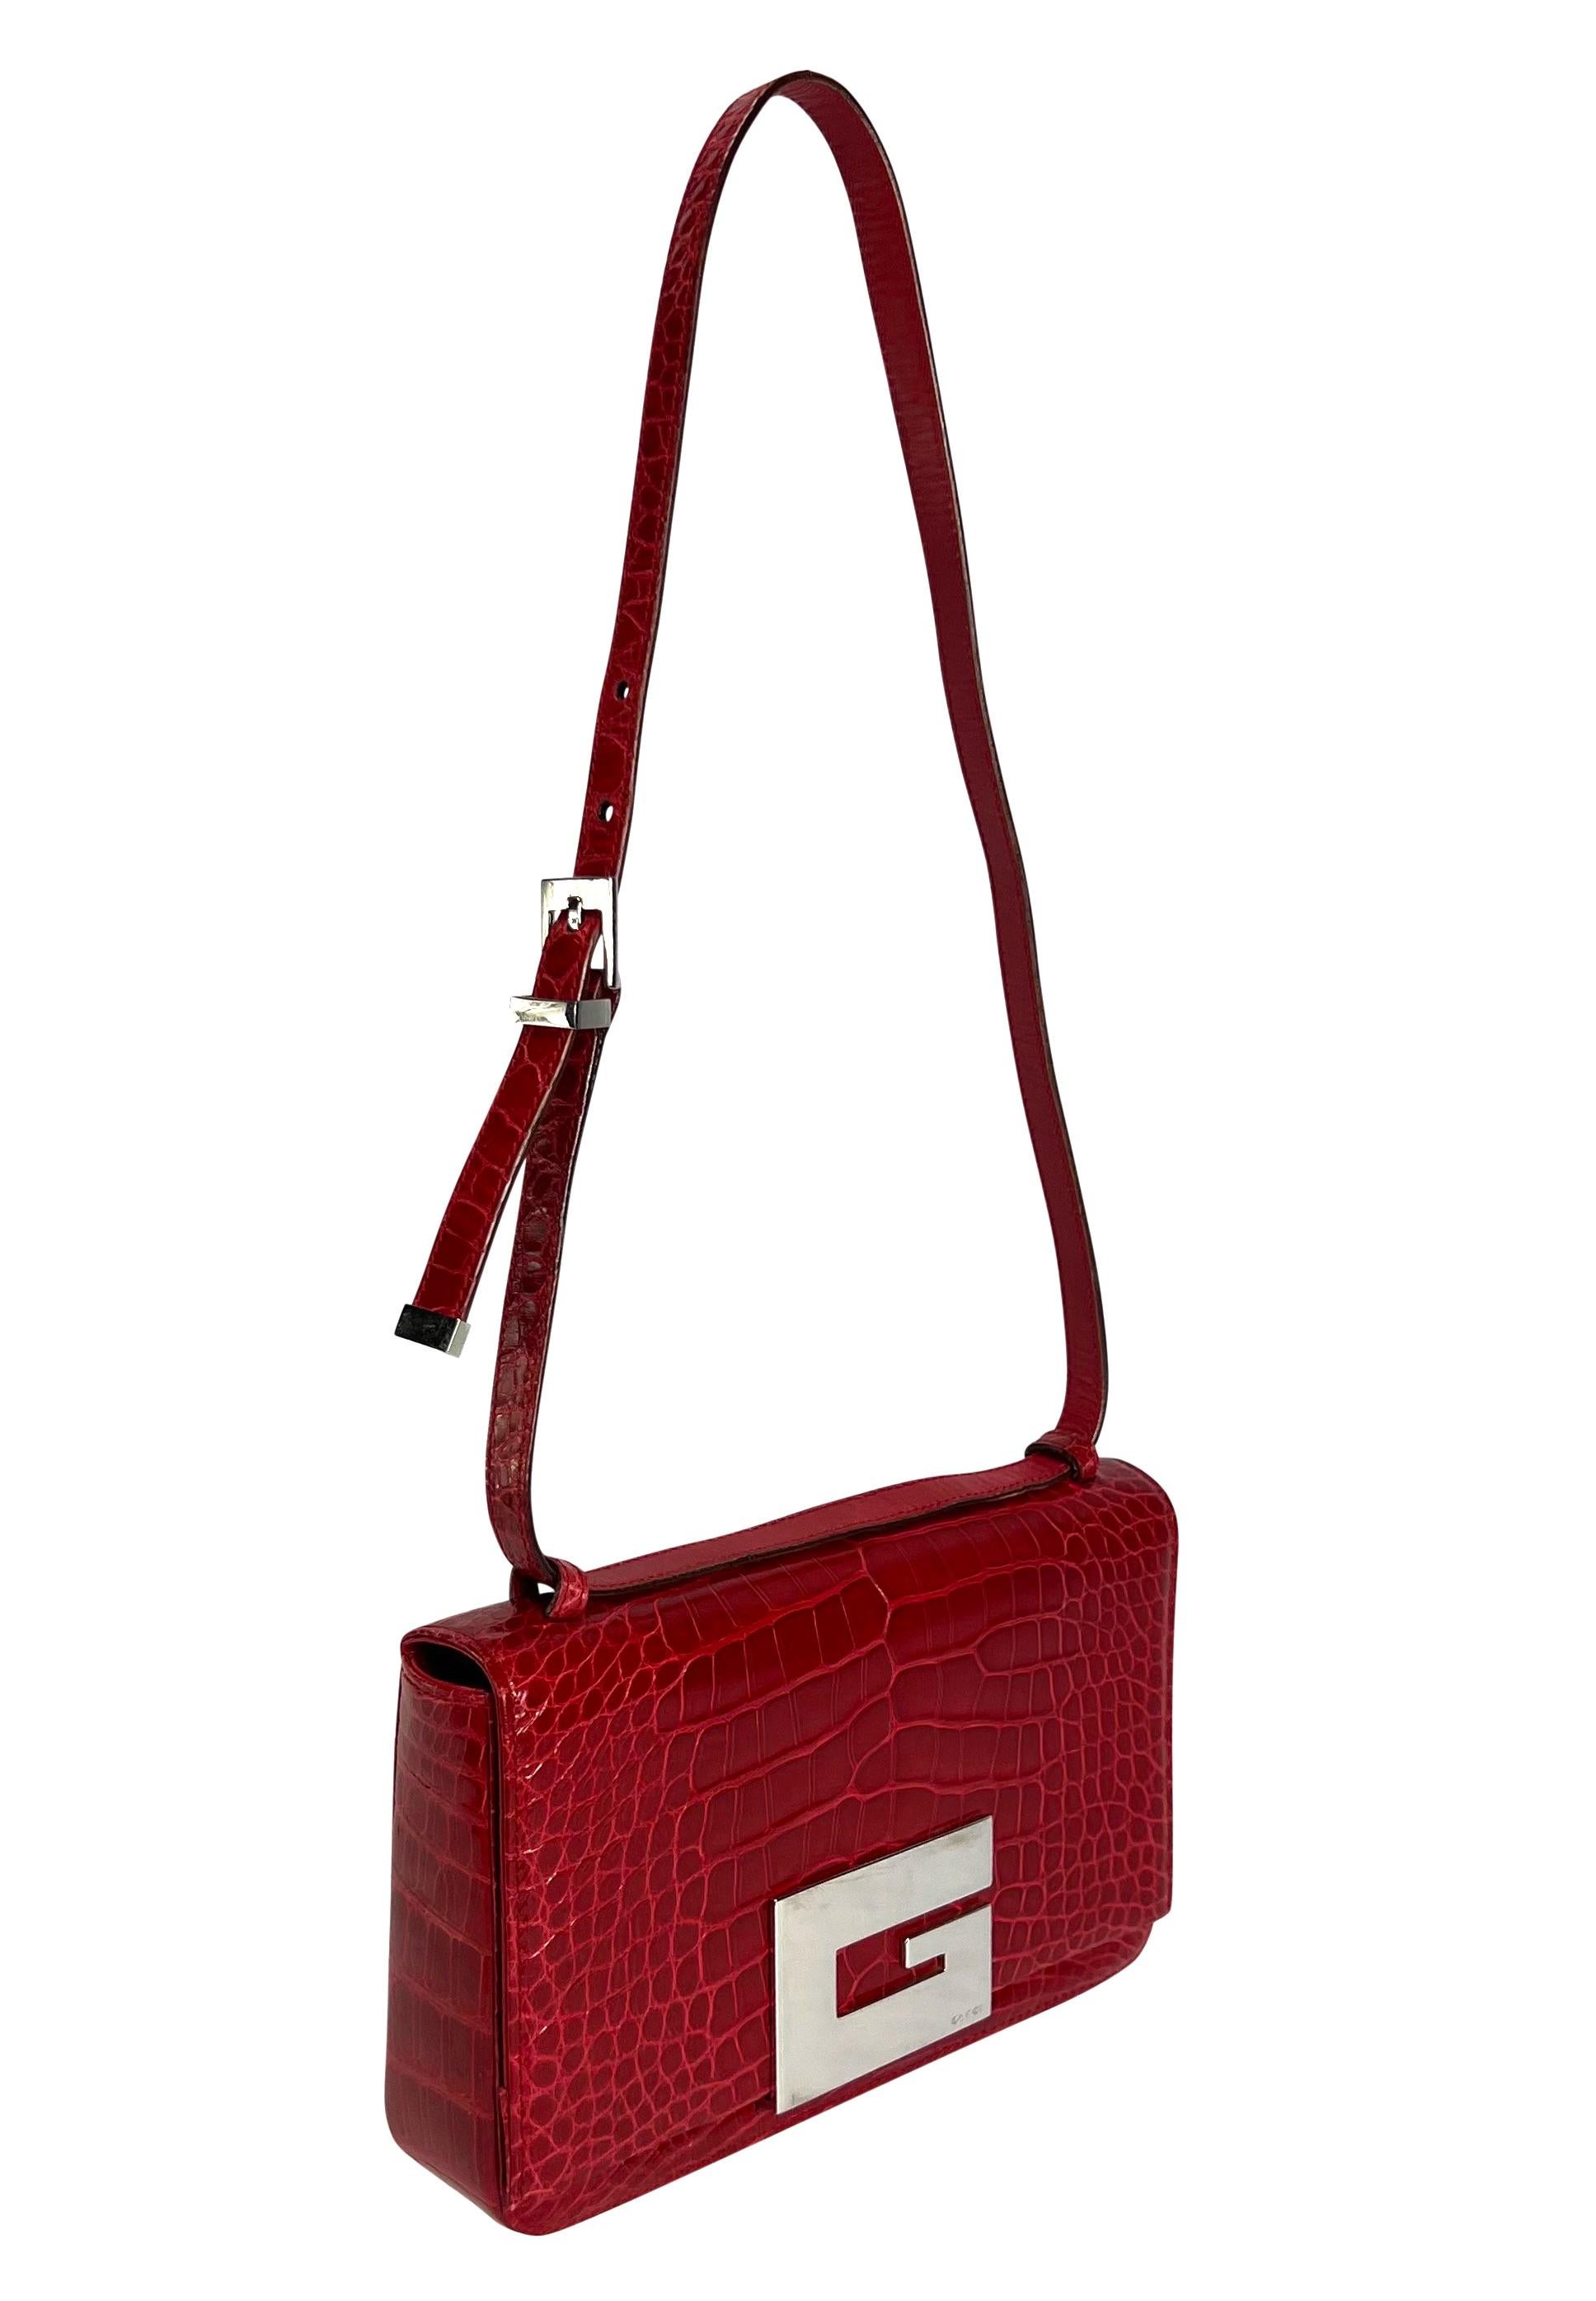 S/S 1998 Gucci by Tom Ford Runway Red Alligator Adjustable Crossbody G Logo Bag In Good Condition For Sale In West Hollywood, CA